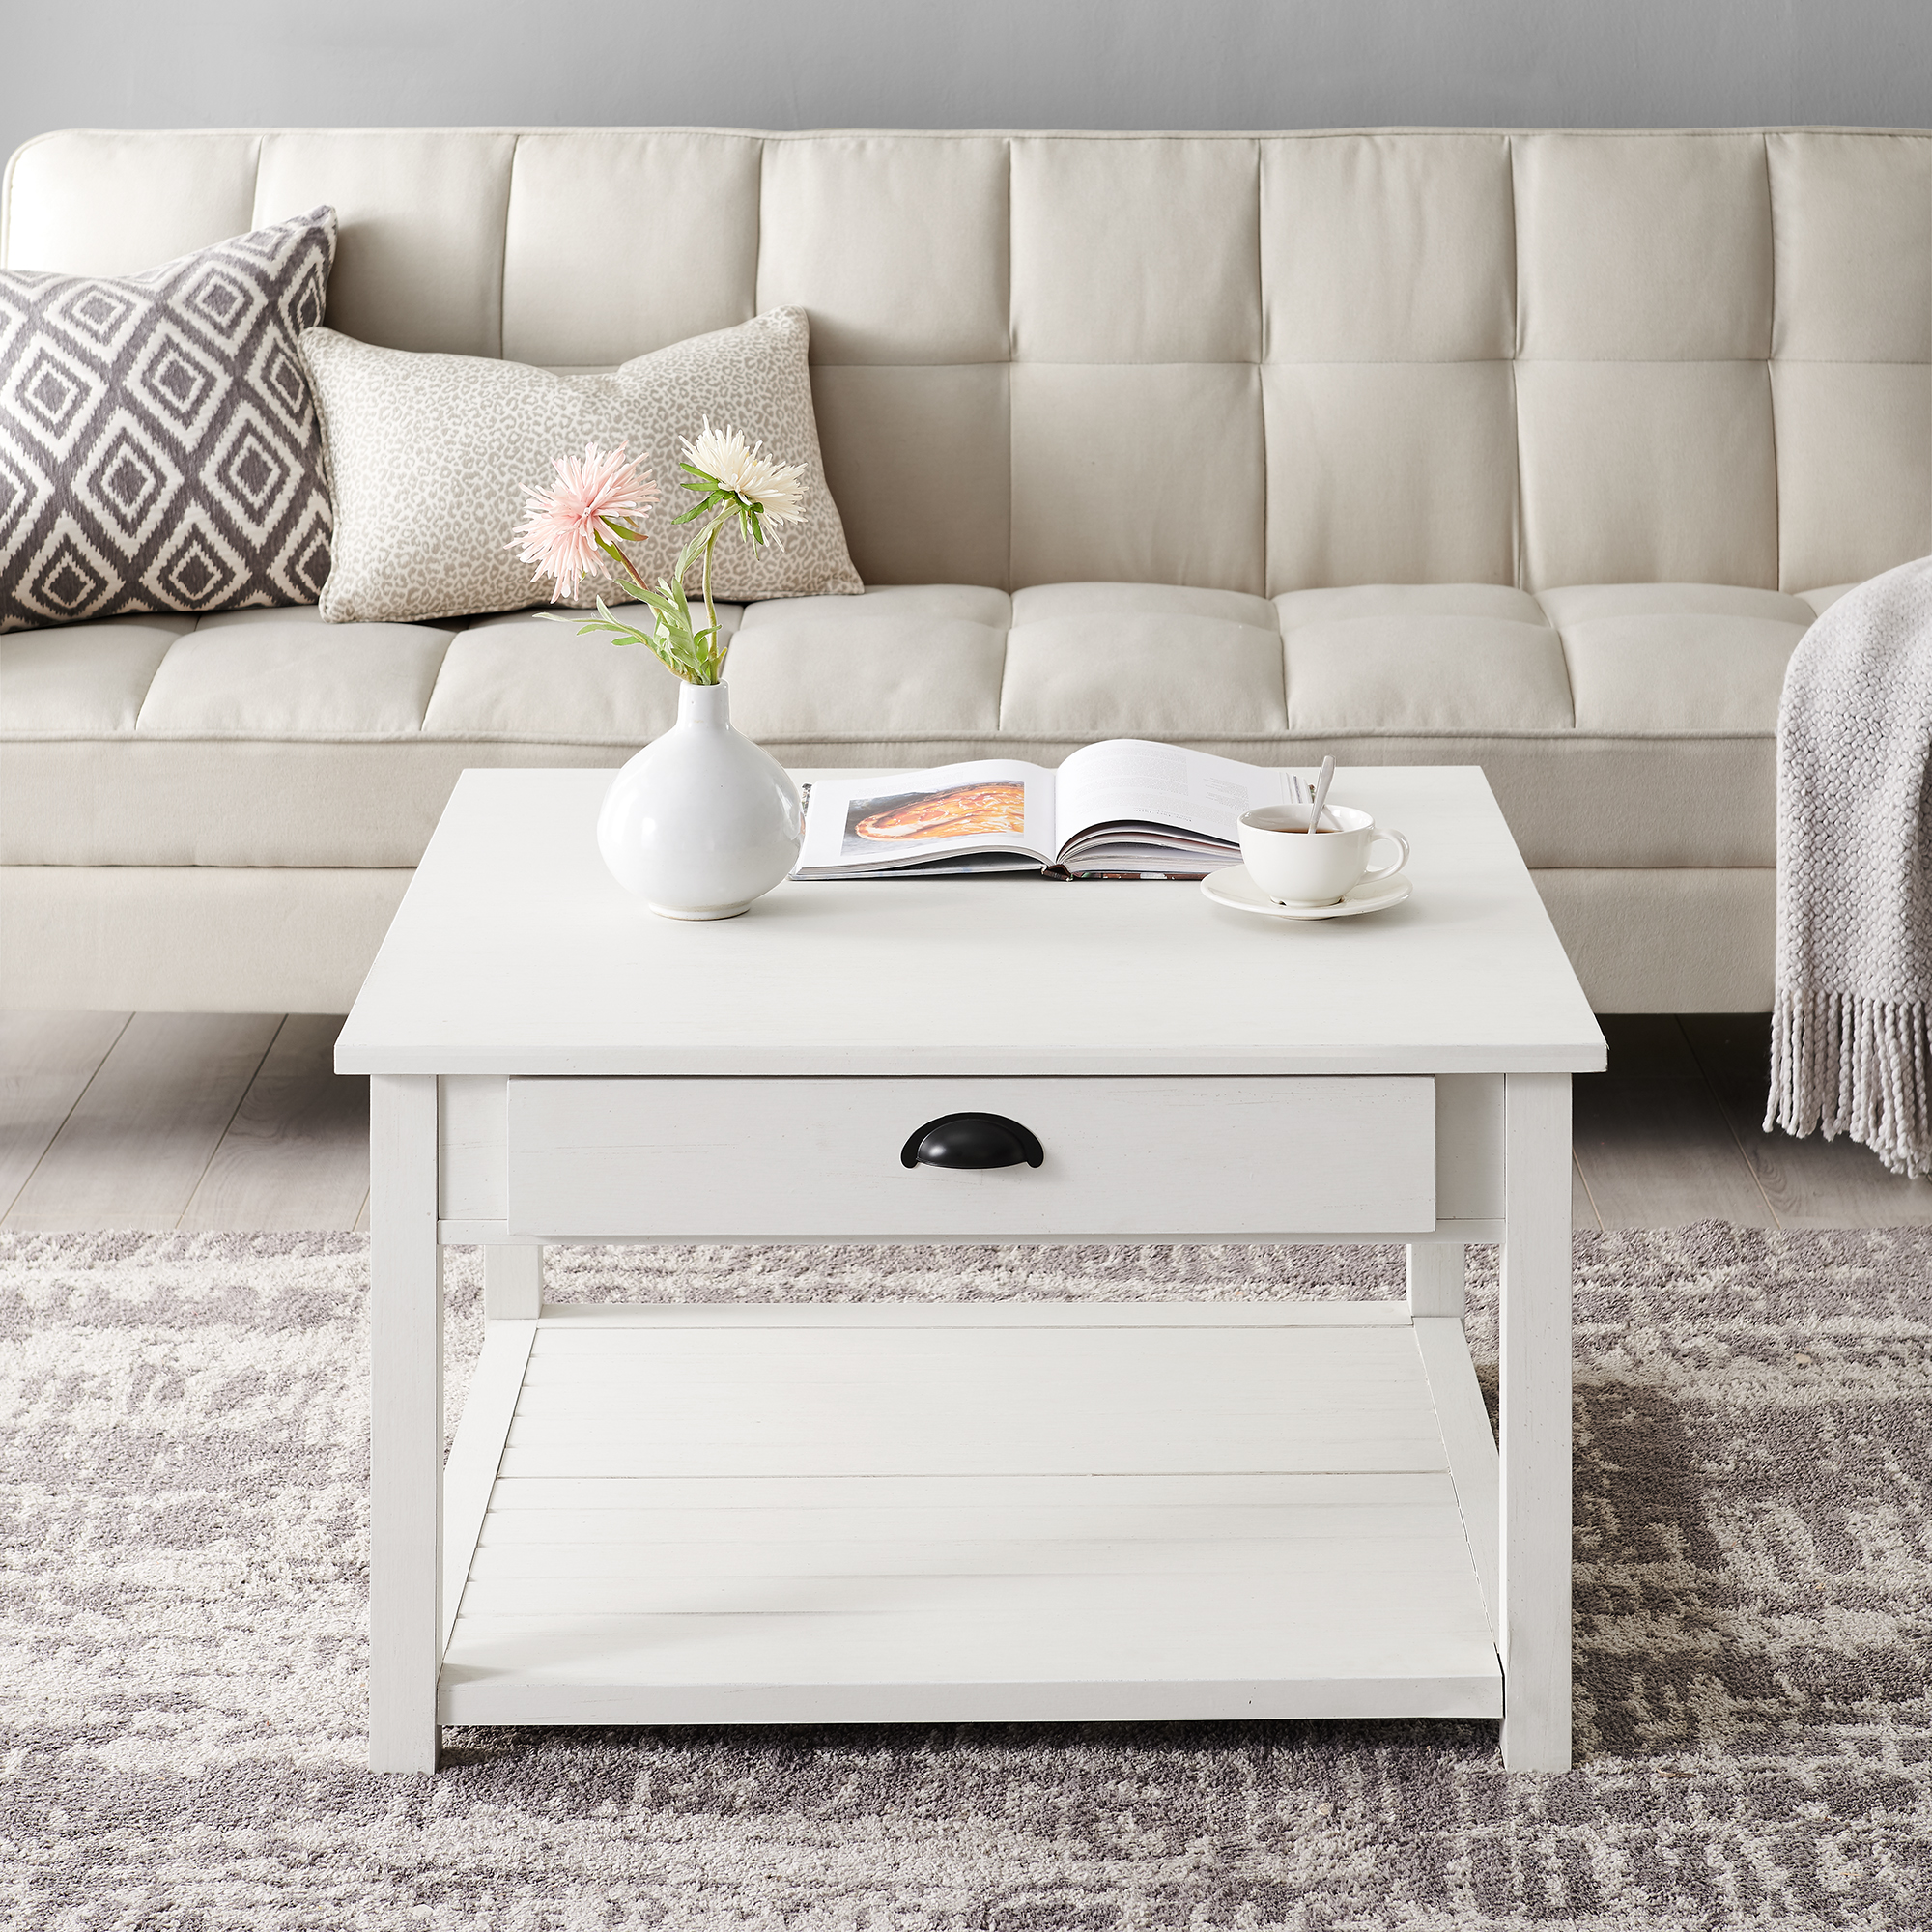 Manor Park 30 inch Square Country Coffee Table, Brushed White - image 7 of 10